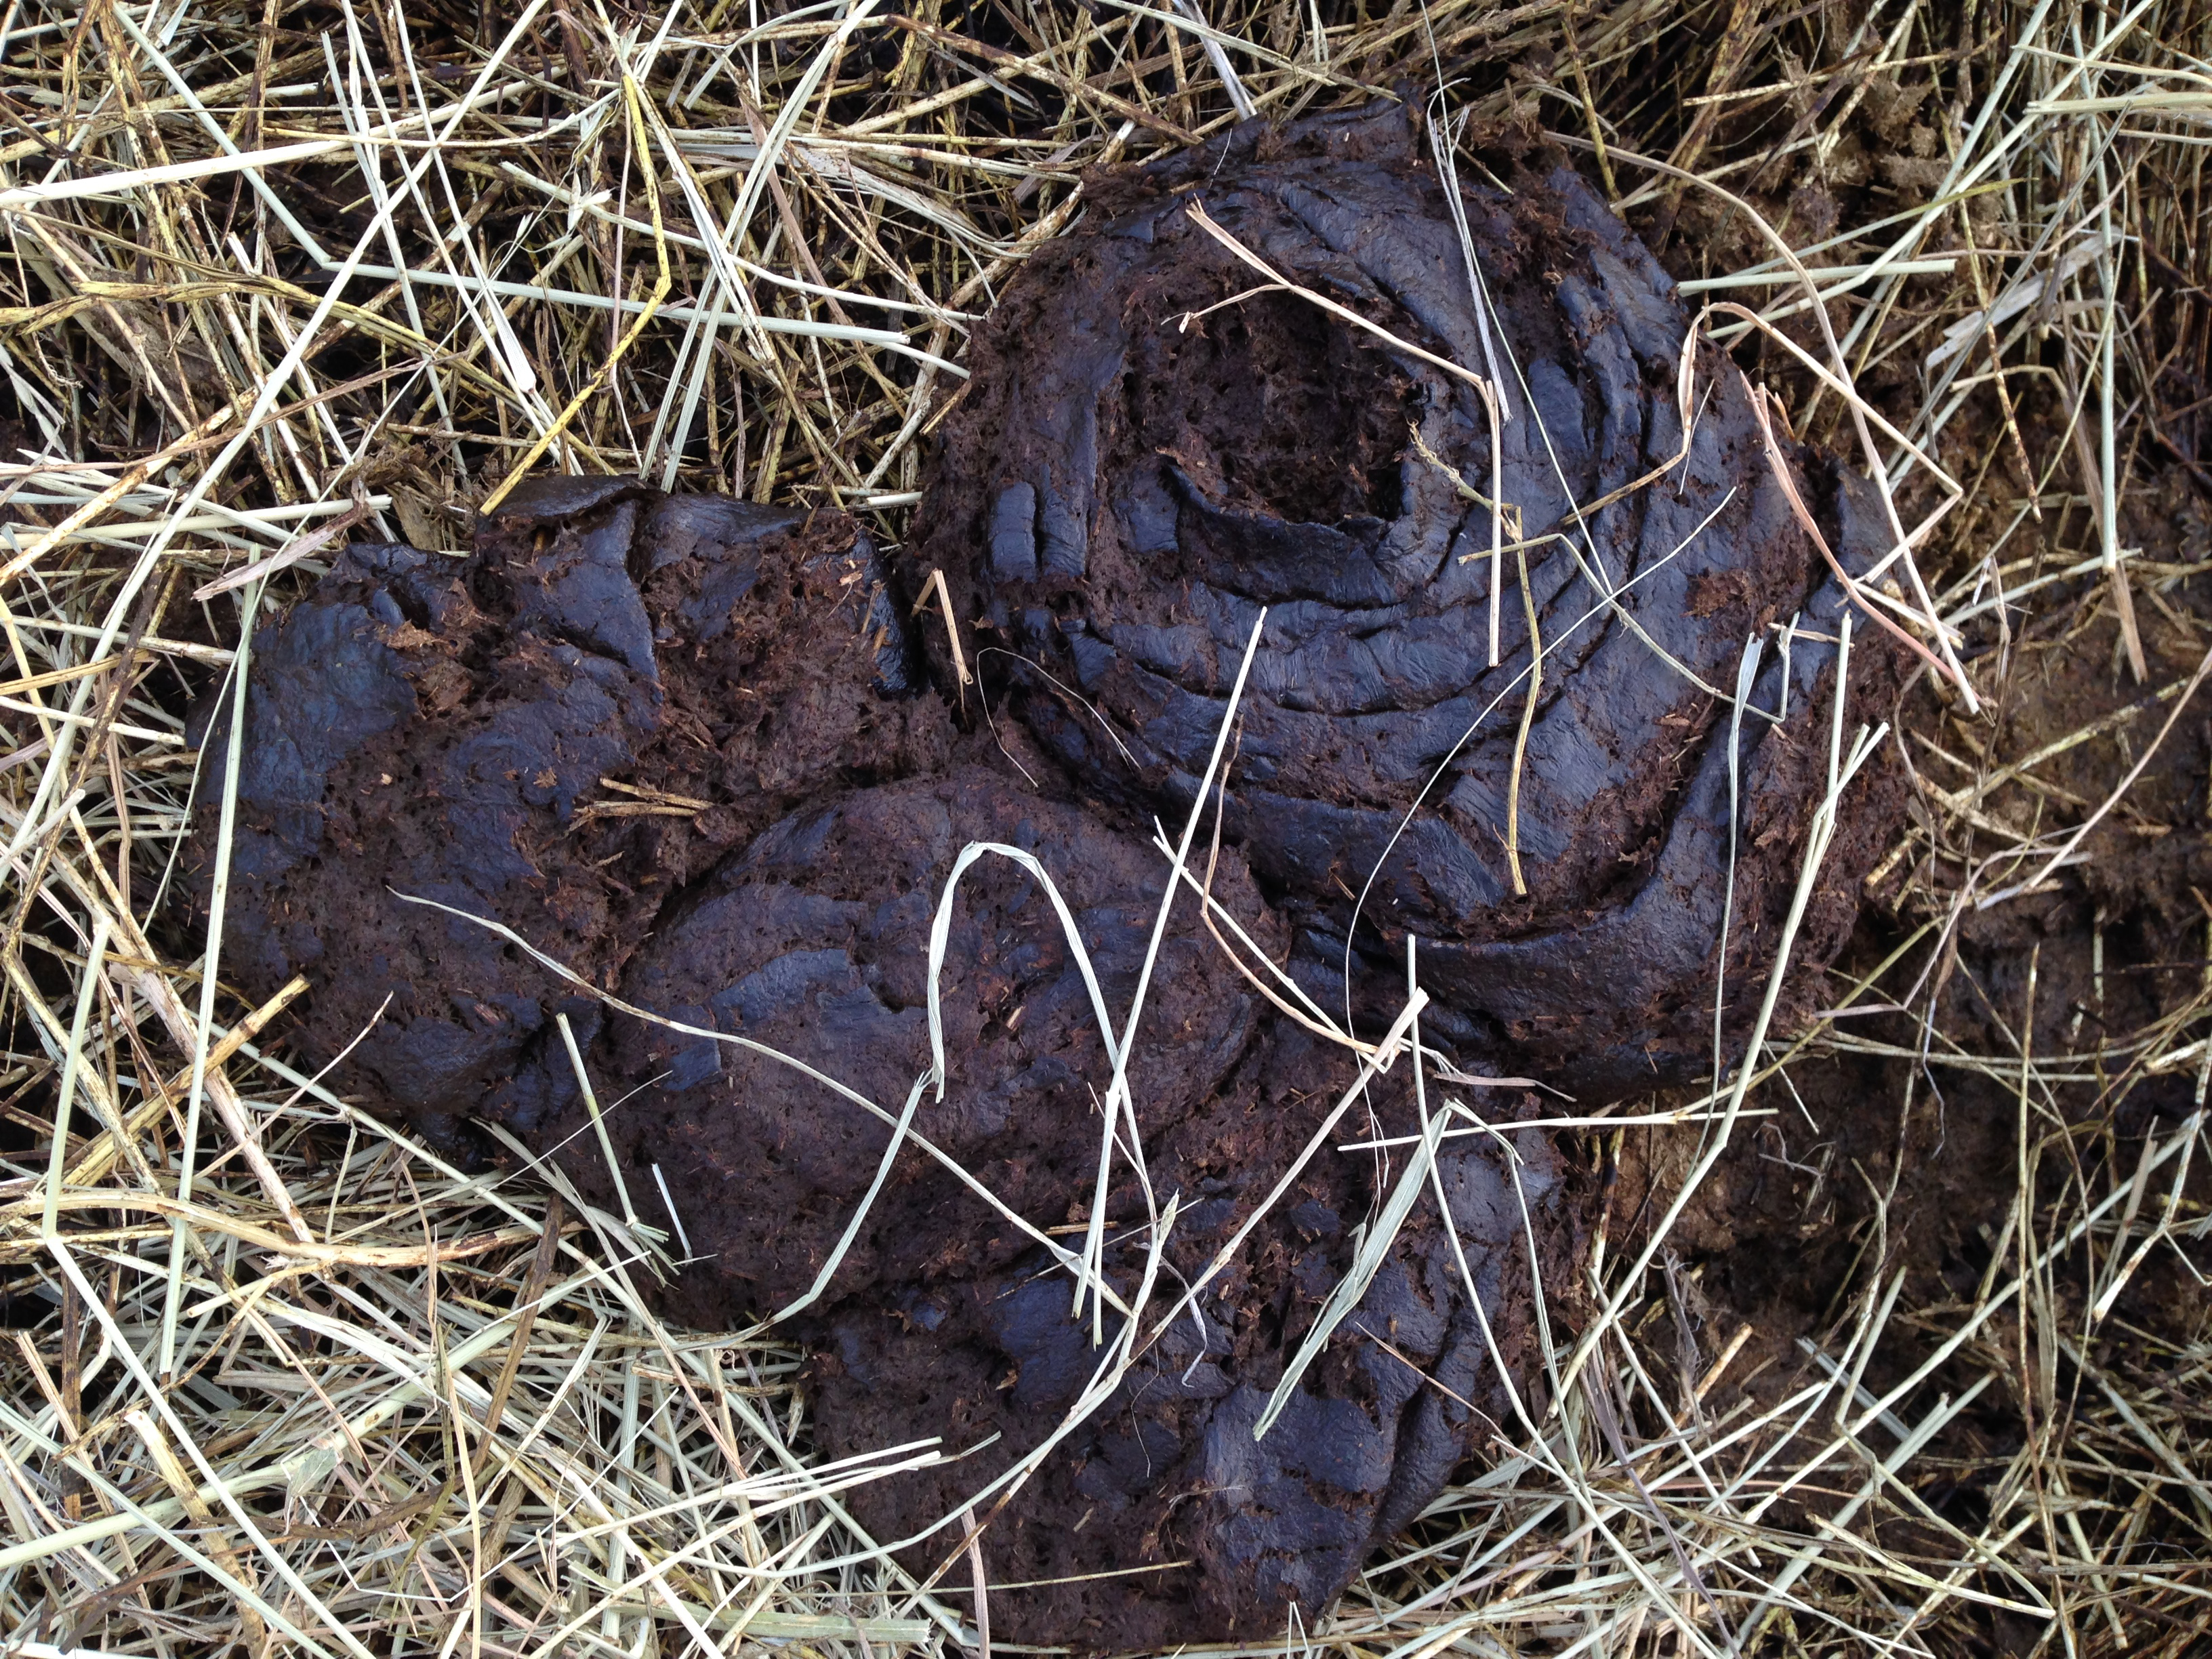 Cow manure patty that is approximately 1 ½-2 inches tall, has 3-4 flat rings, with a depression in the center.